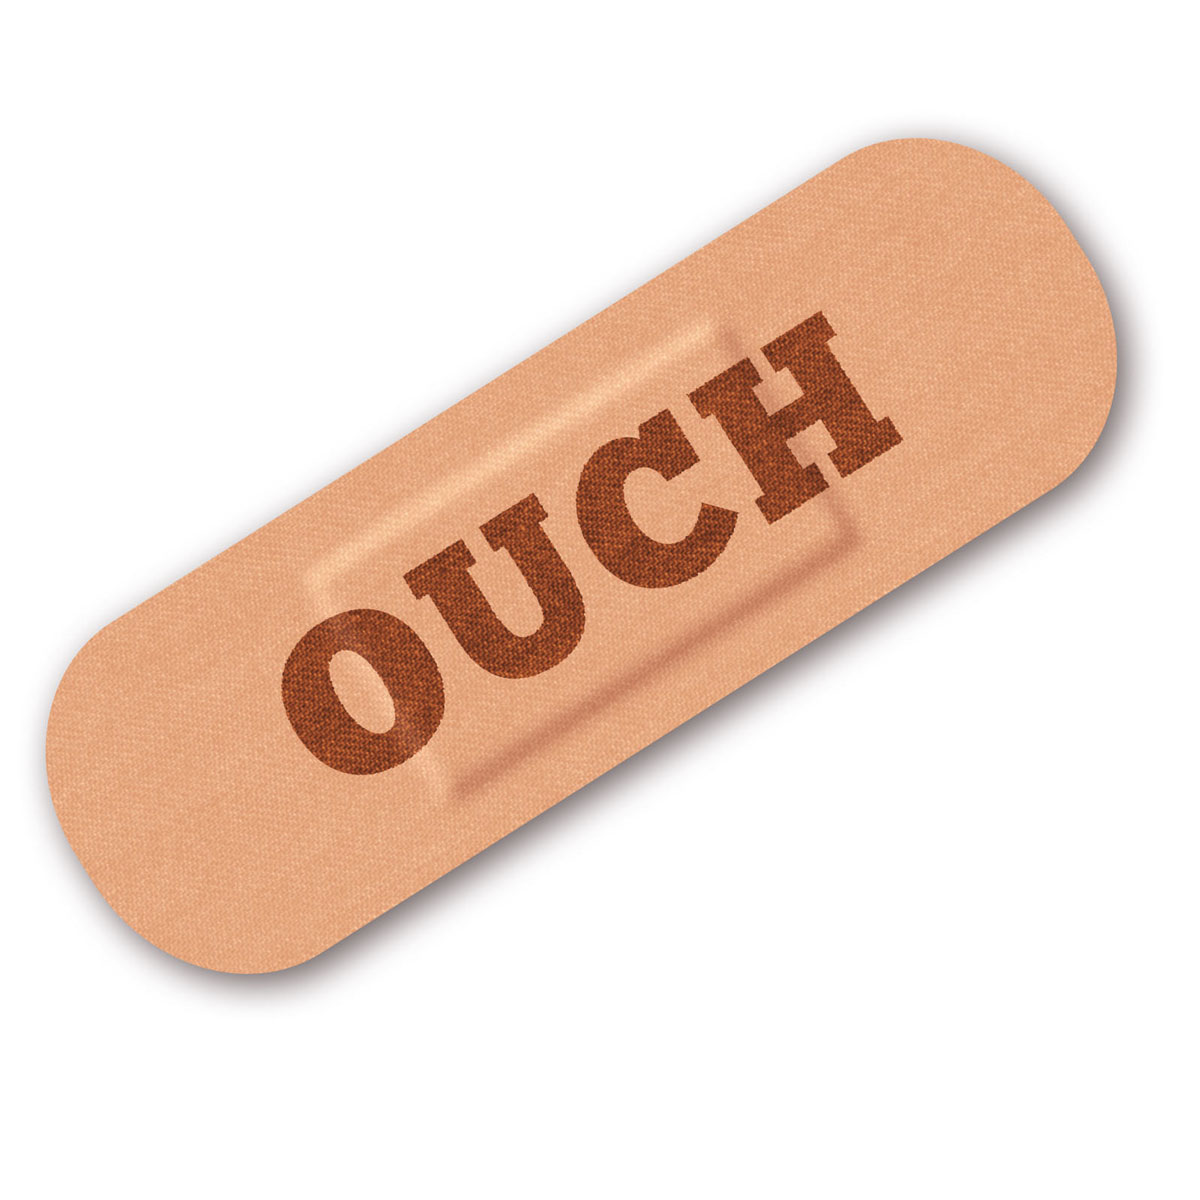 Ouch Car Sticking Plaster Car Decal For Dents And Scratches Small 15cm X 5cm Ebay